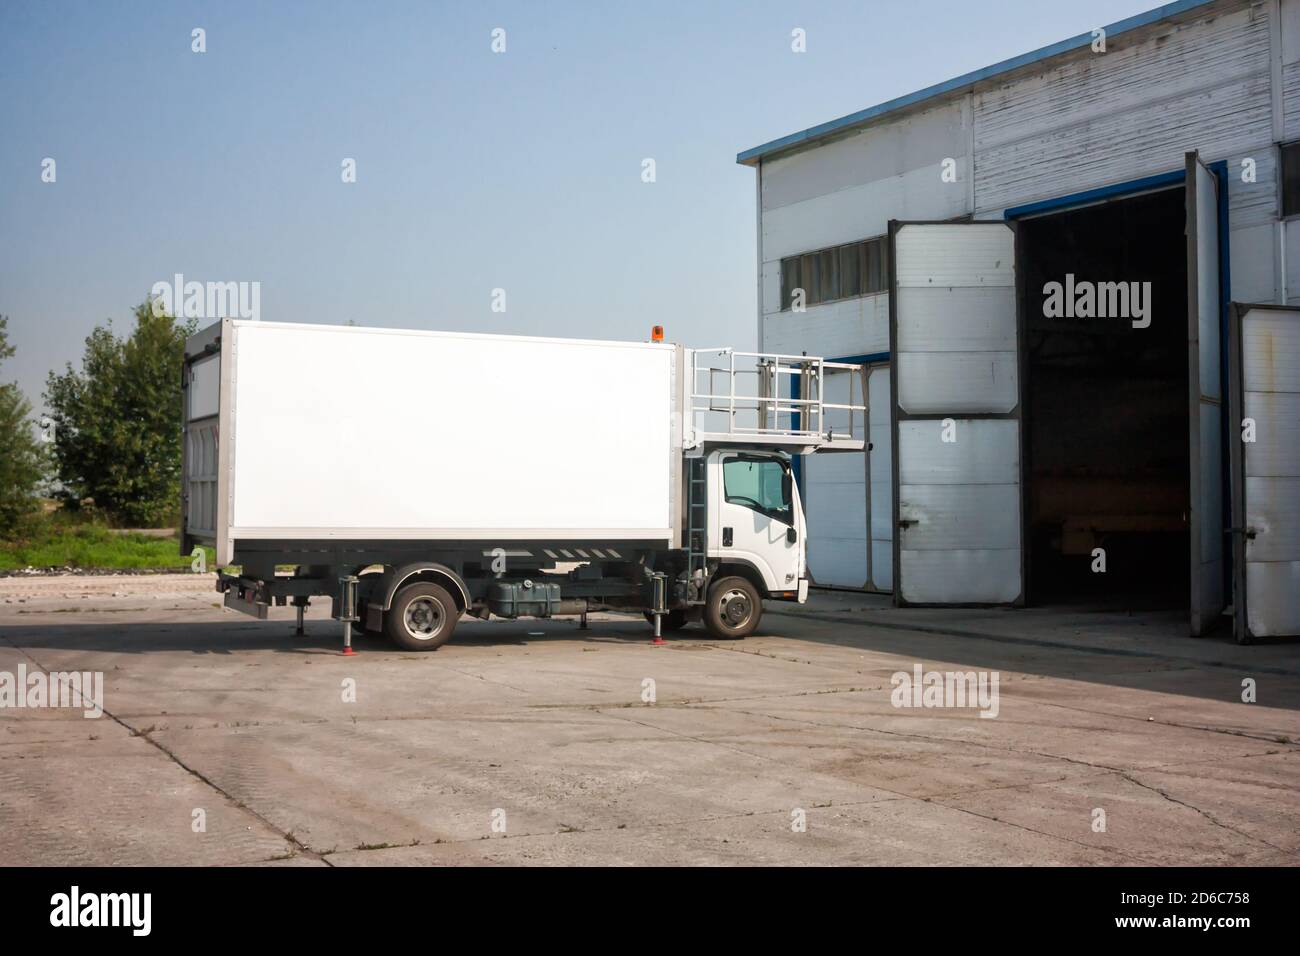 Airport catering truck near garage boxes Stock Photo